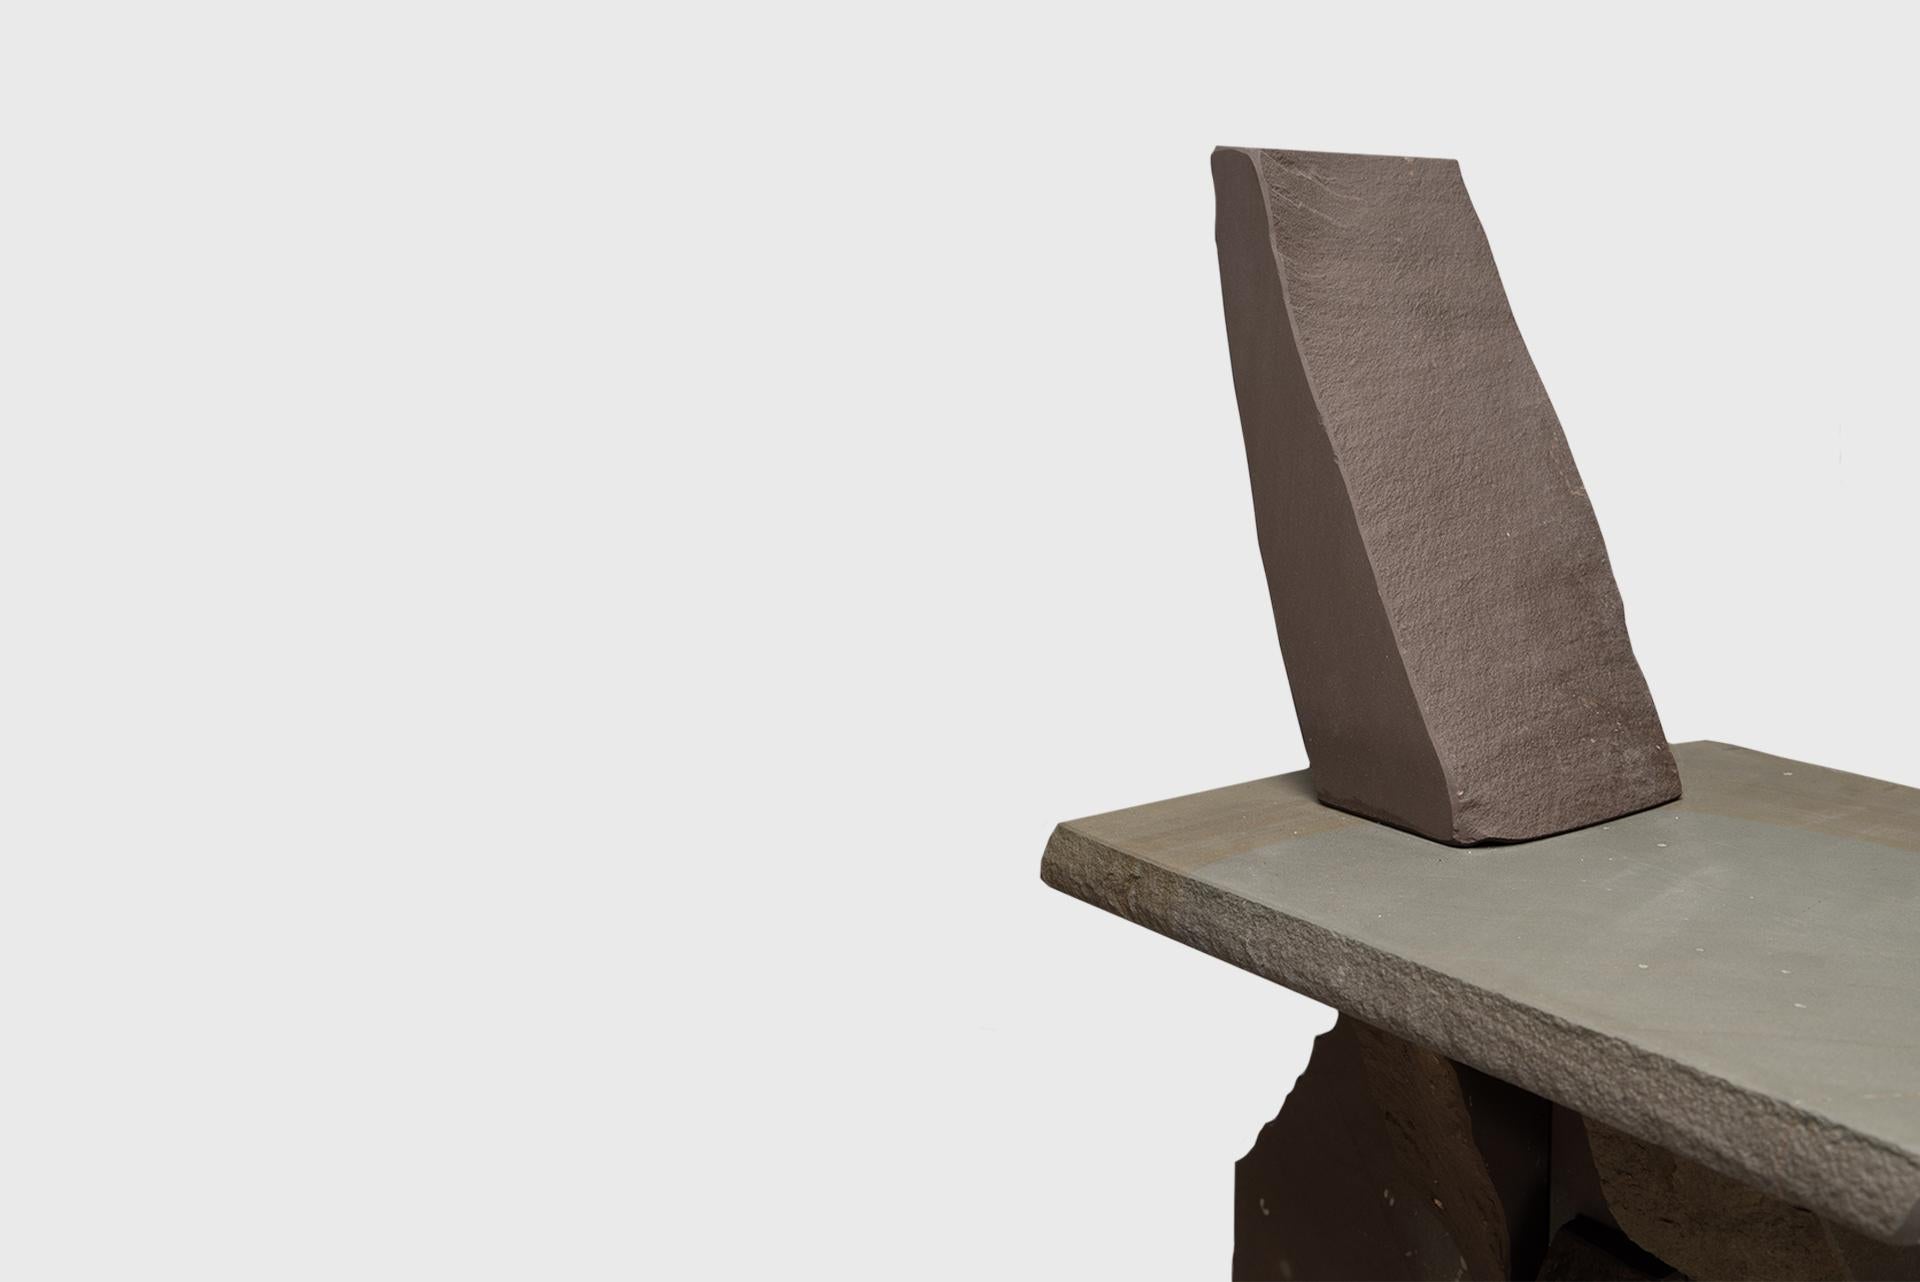 Contemporary Natural Chair 18, Graywacke Offcut Gray Stone, Carsten in der Elst For Sale 1